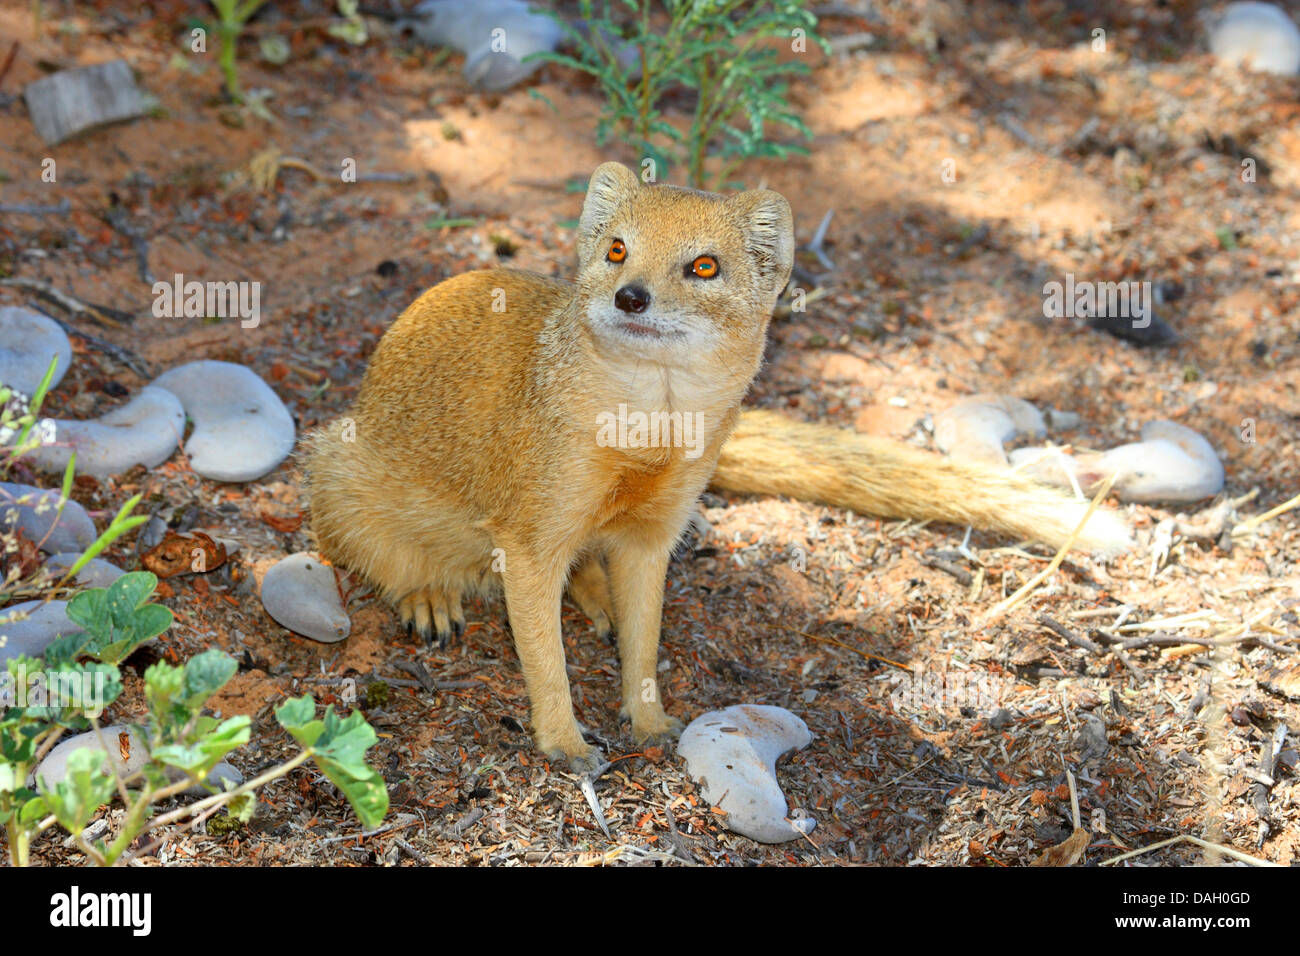 yellow mongoose (Cynictis penicillata), sitting on waste ground looking up, South Africa, Kgalagadi Transfrontier National Park Stock Photo